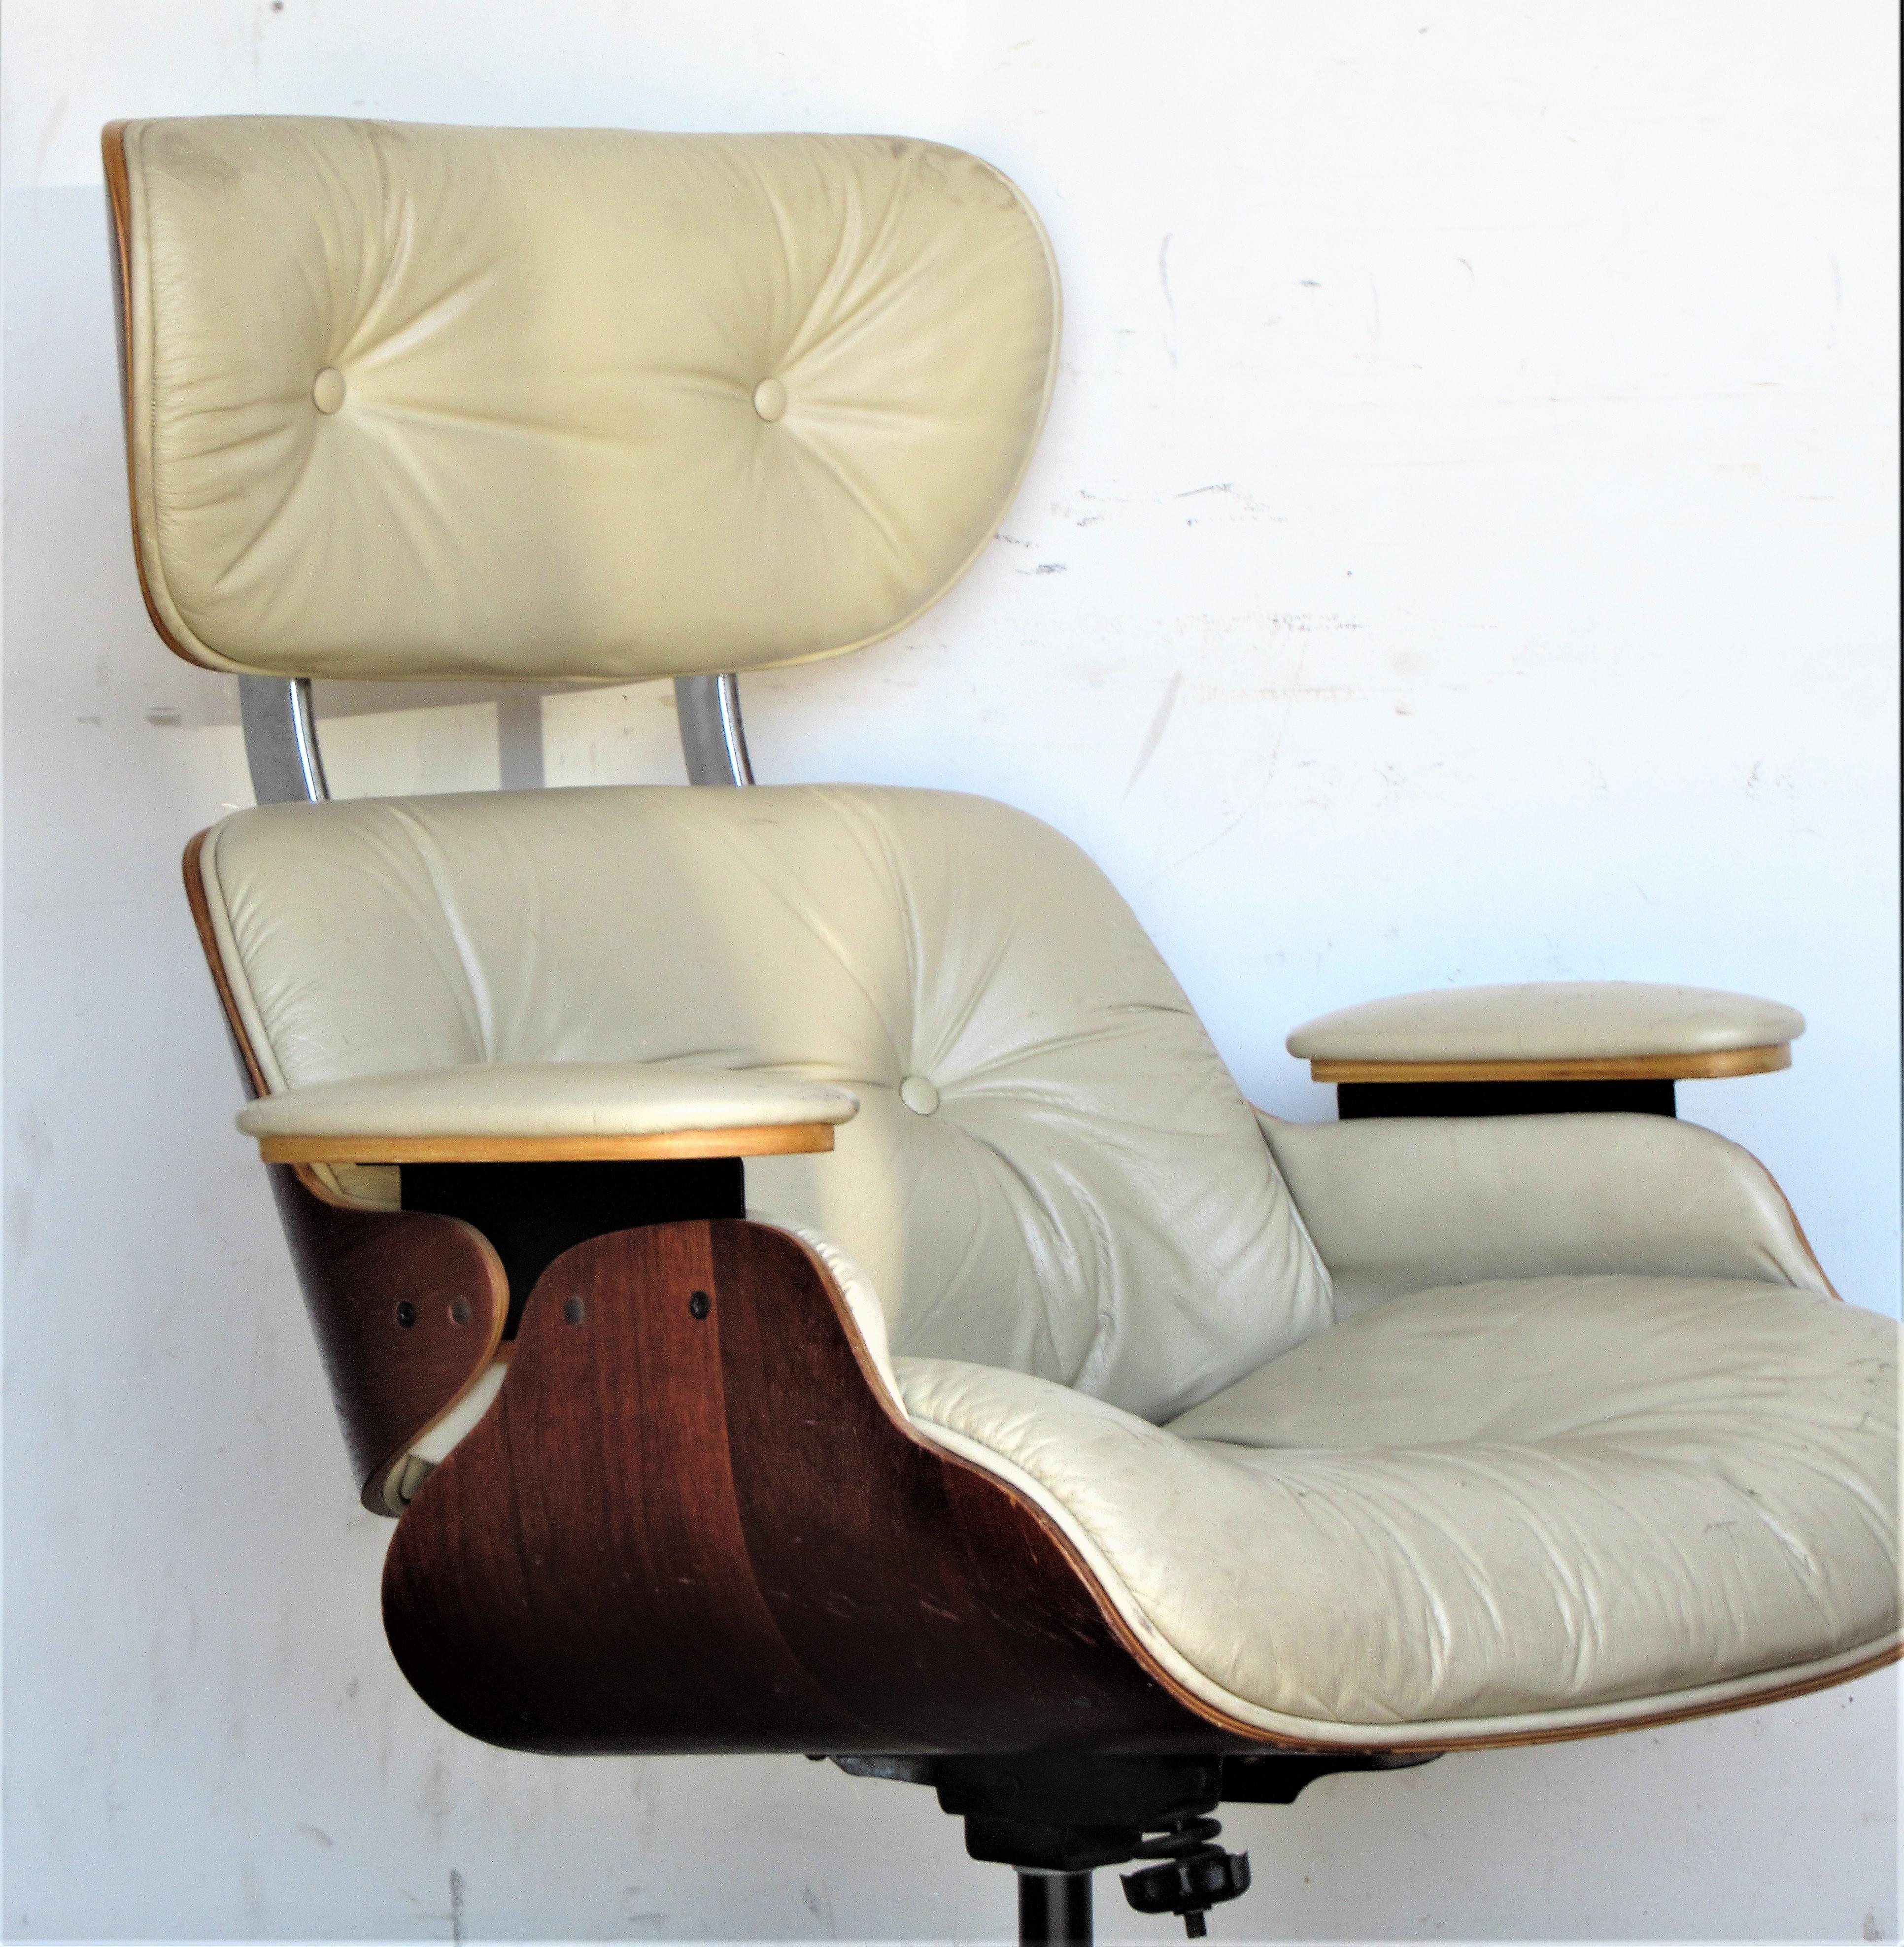 Eames style bent stacked laminated plywood swivel tilting walnut lounge chair and ottoman - good original vintage condition, circa 1960 - 1970. We are pretty sure the chair is by Plycraft, We are not sure about the manufacturer of the ottoman, it is